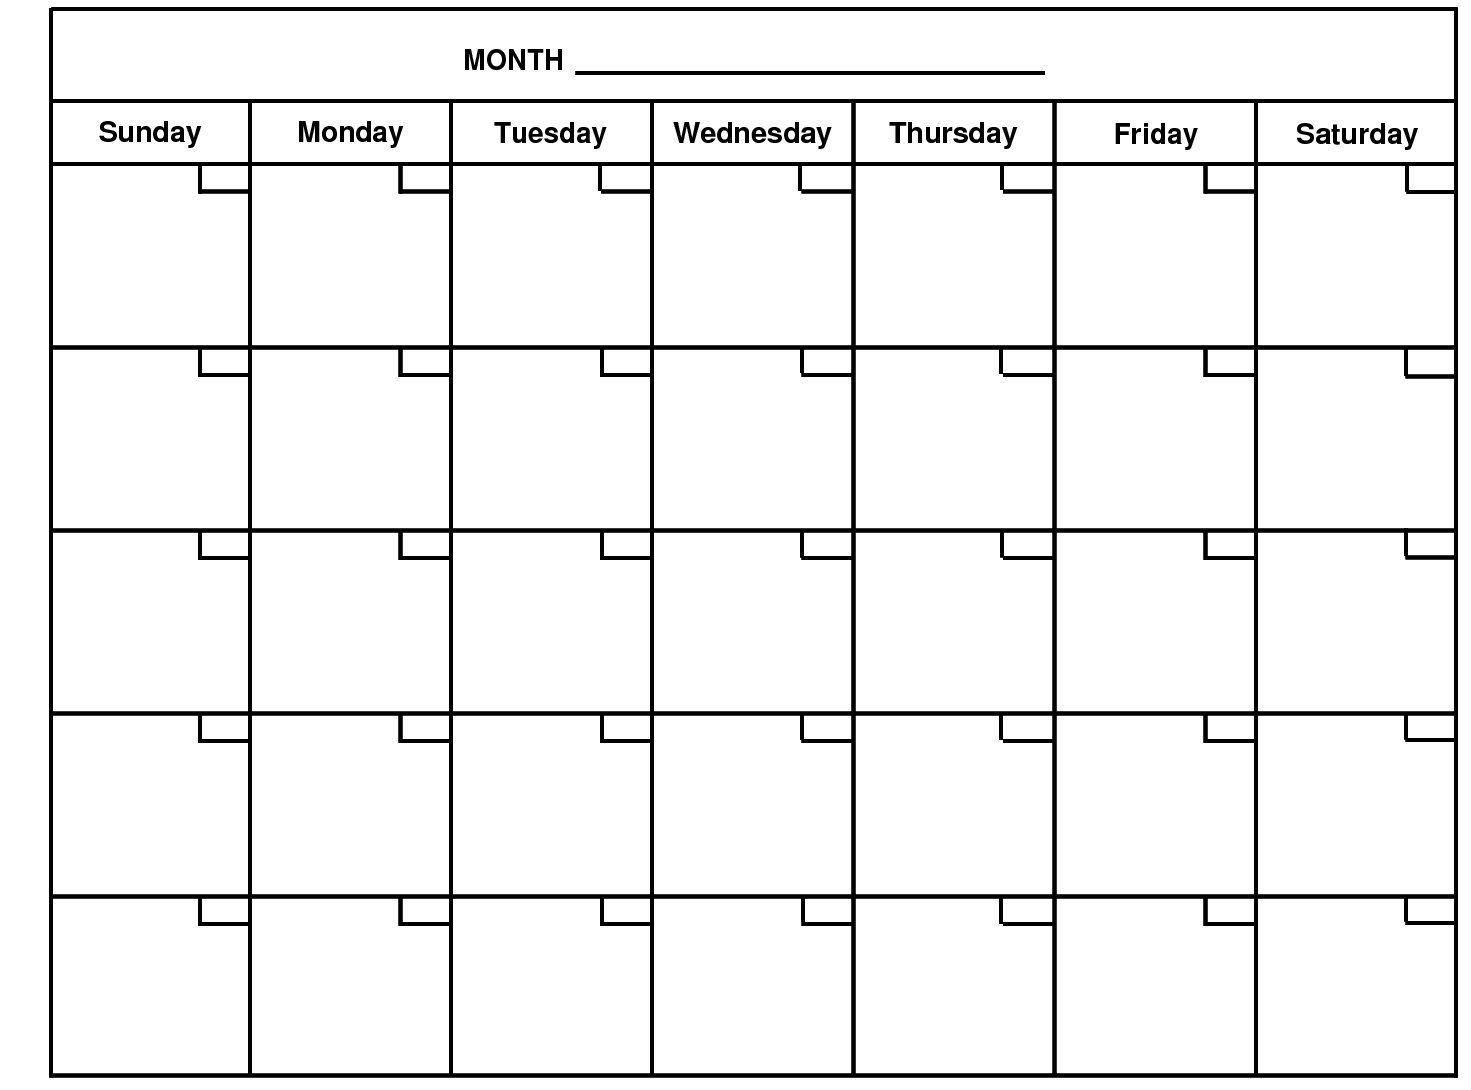 2020 Monthly Calendar Template Word - Google Search | Blank